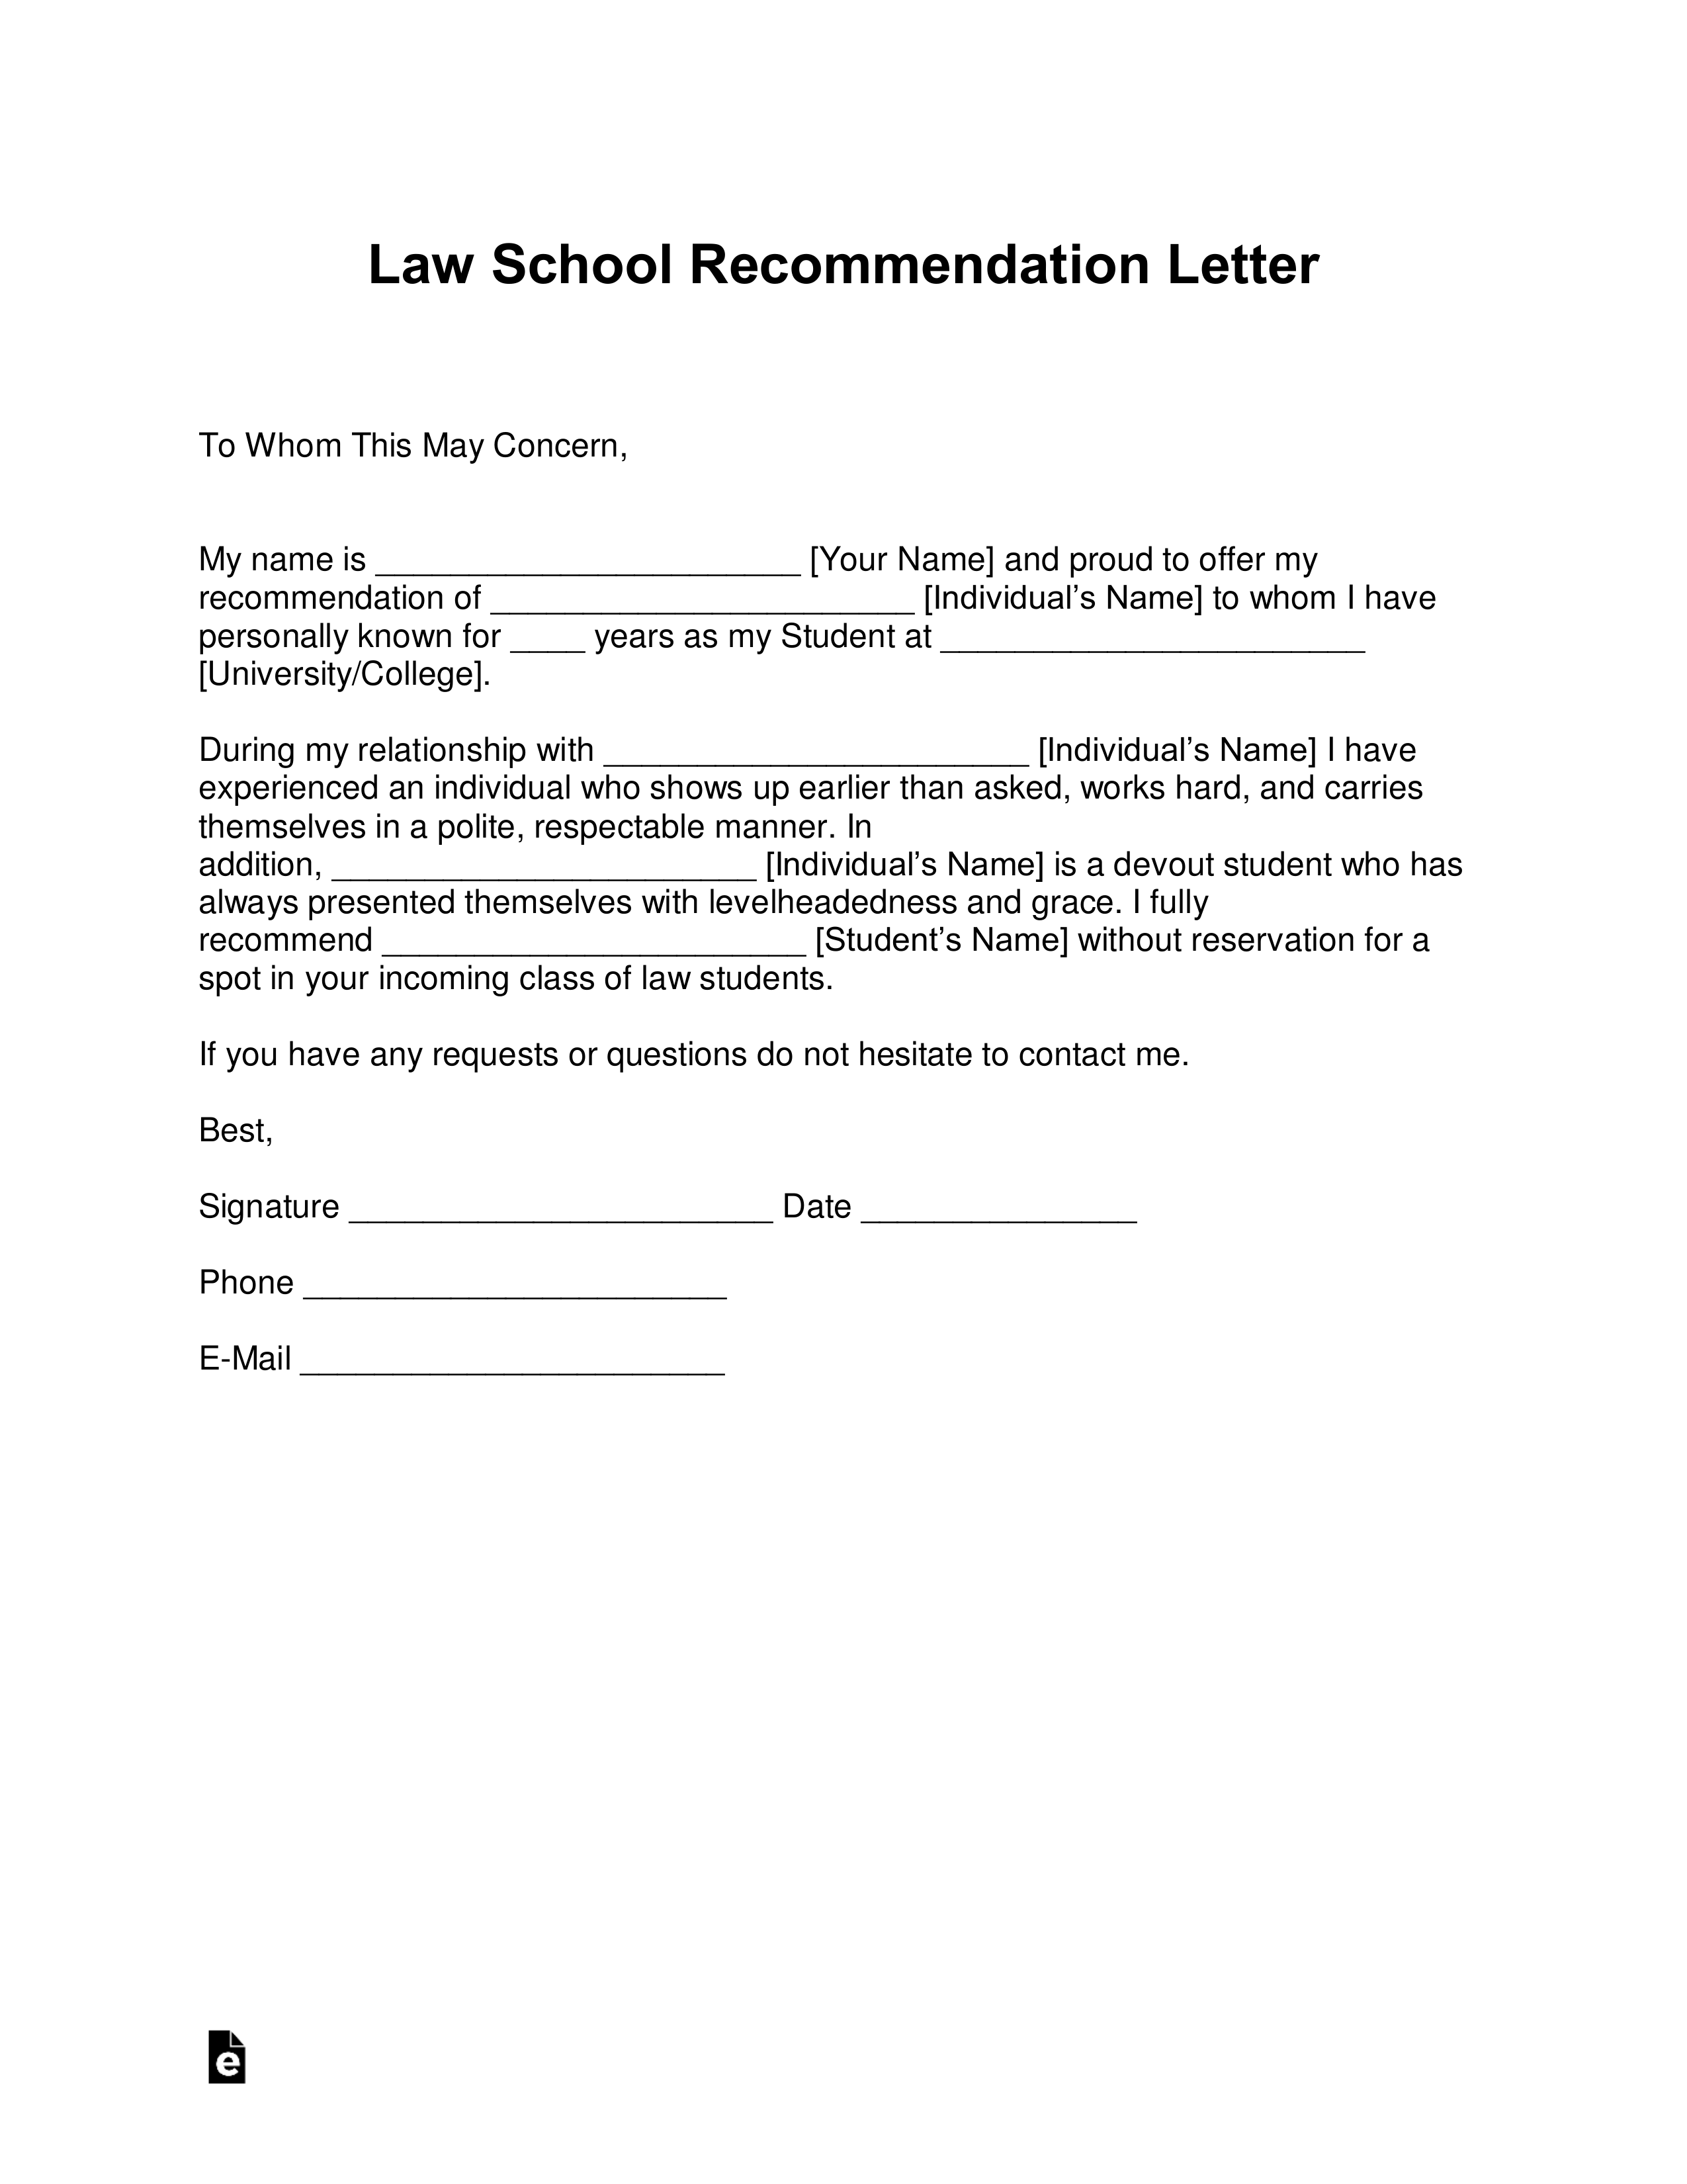 Request For Recommendation Letter from eforms.com